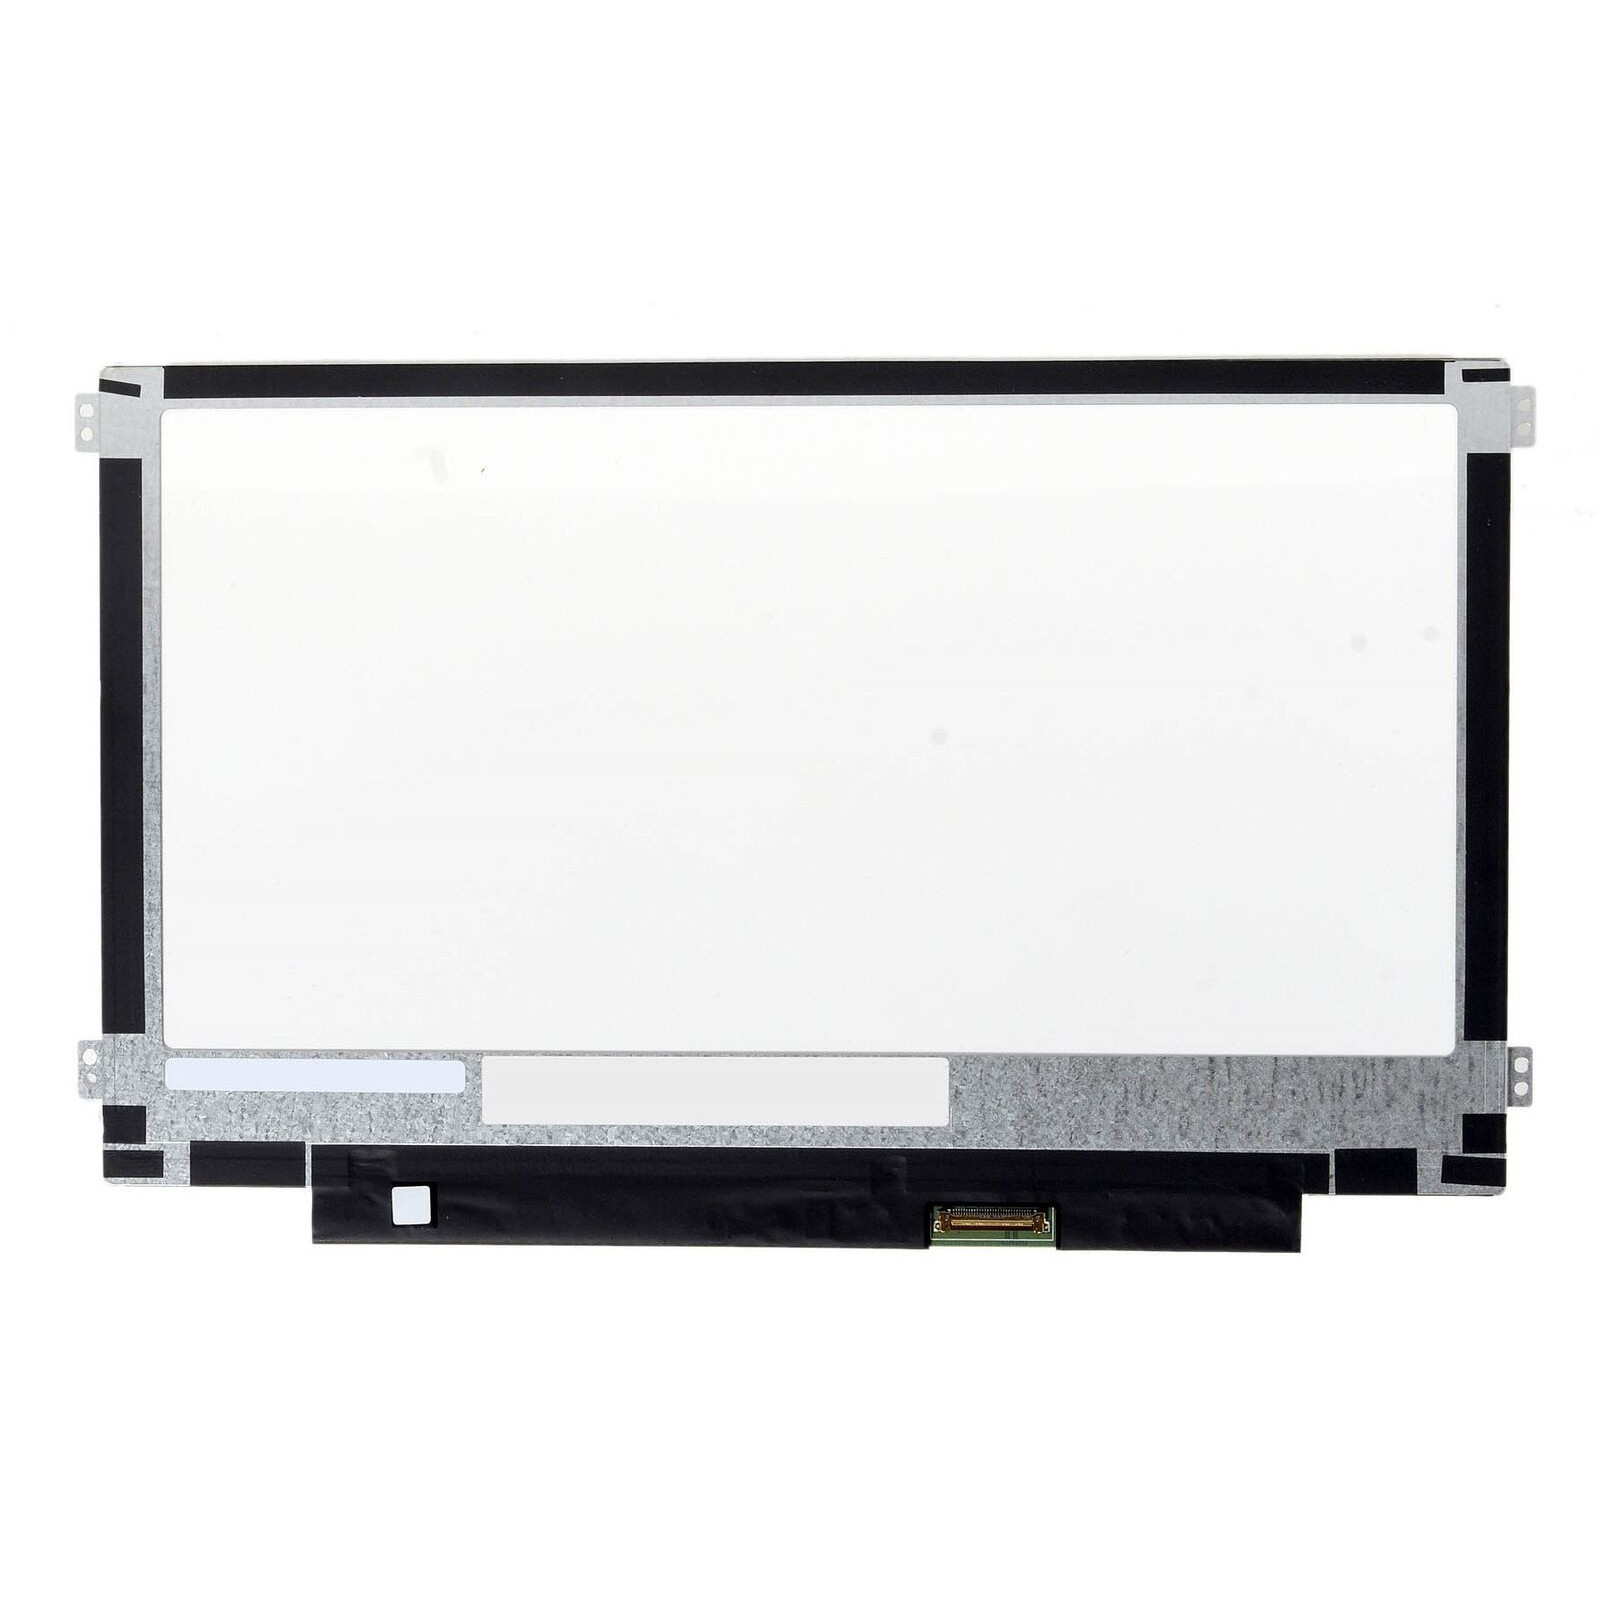 Screen Replacement For Lenovo 100e Notebook 81M8 LCD Display